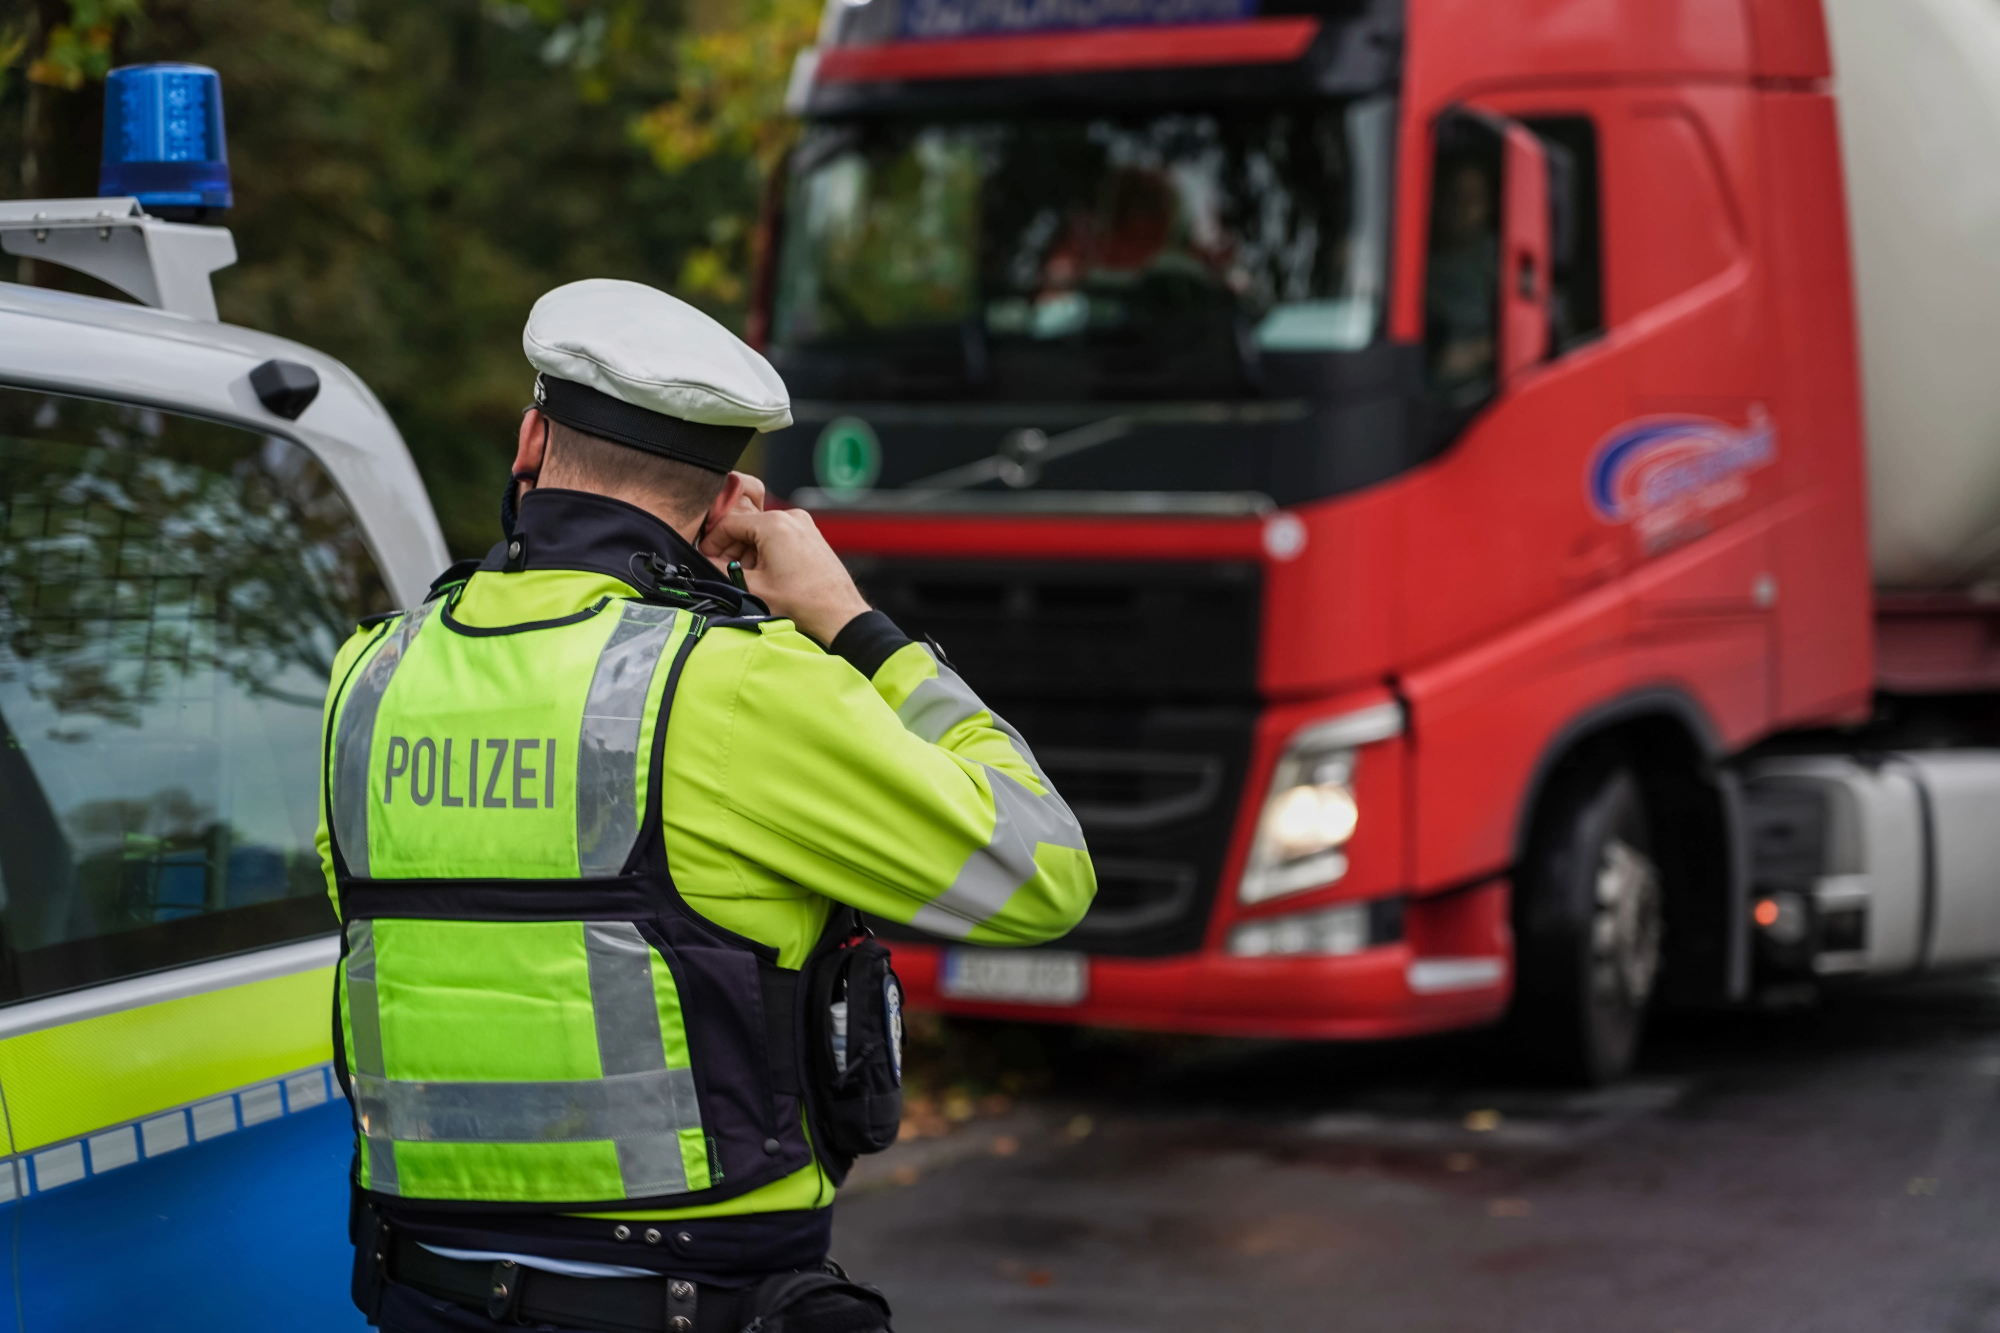 Truck & Bus Operation: Vehicle Inspections in Belgium, France, and Romania (November 6-12, 2023)